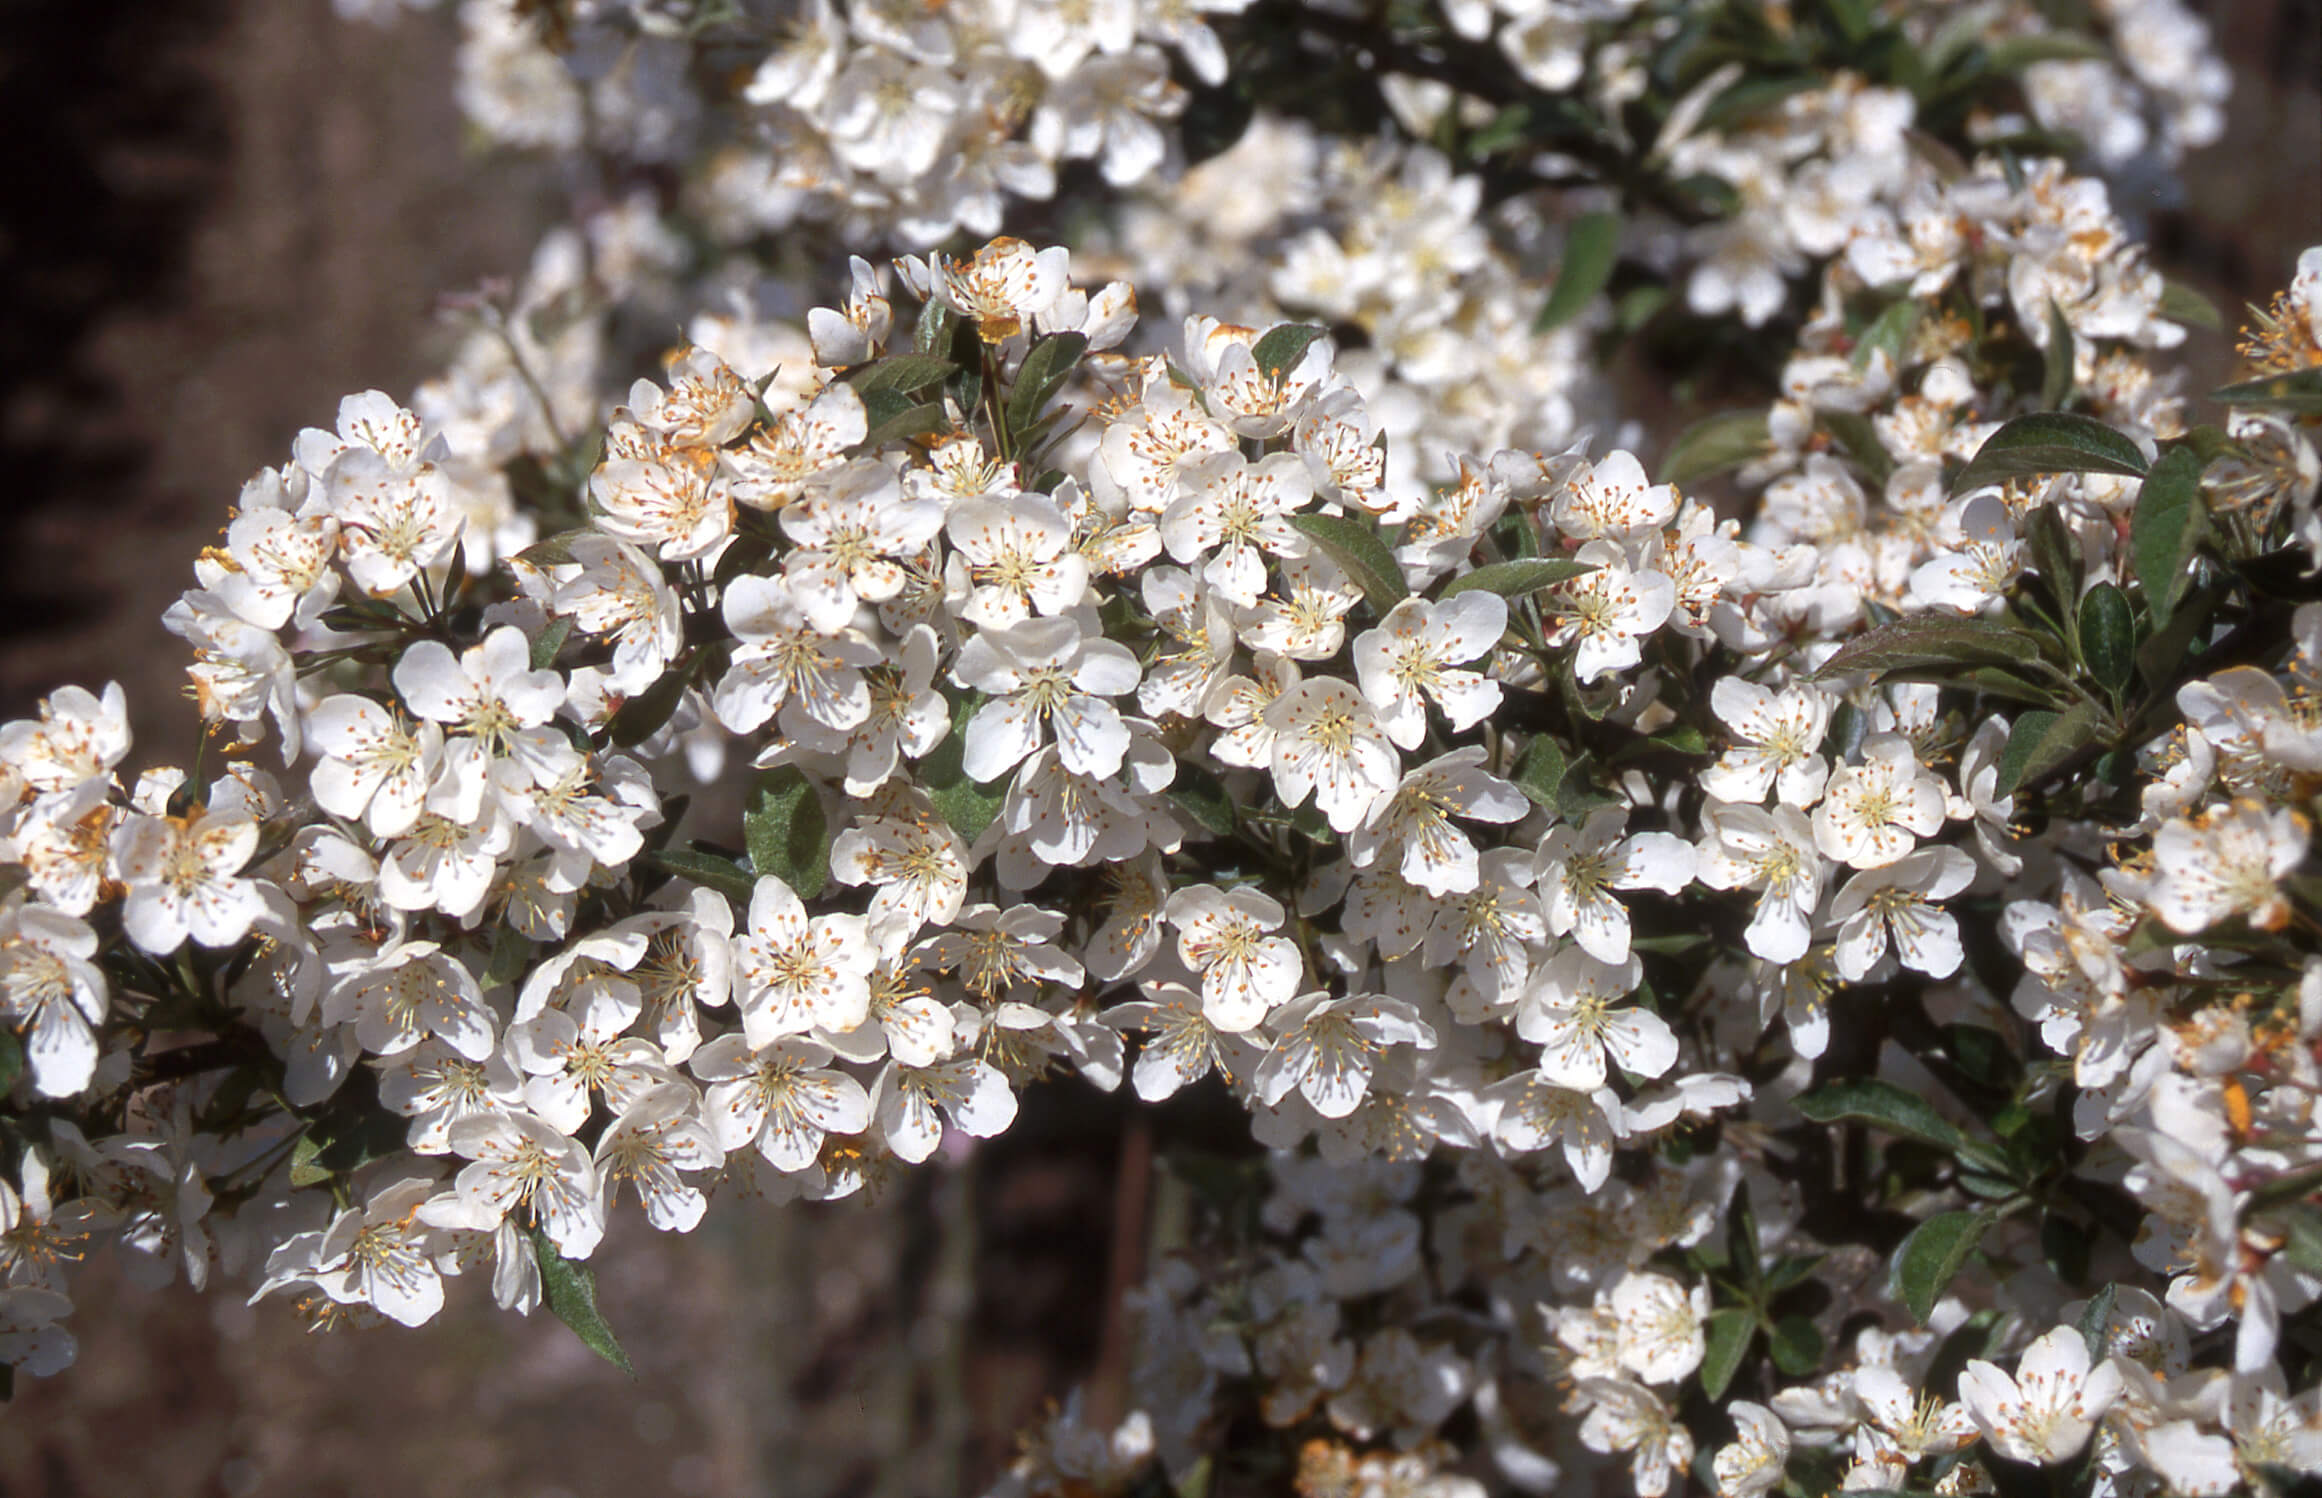 The dwarf 'Sargent Tina' has clouds of pretty white flowers in spring.